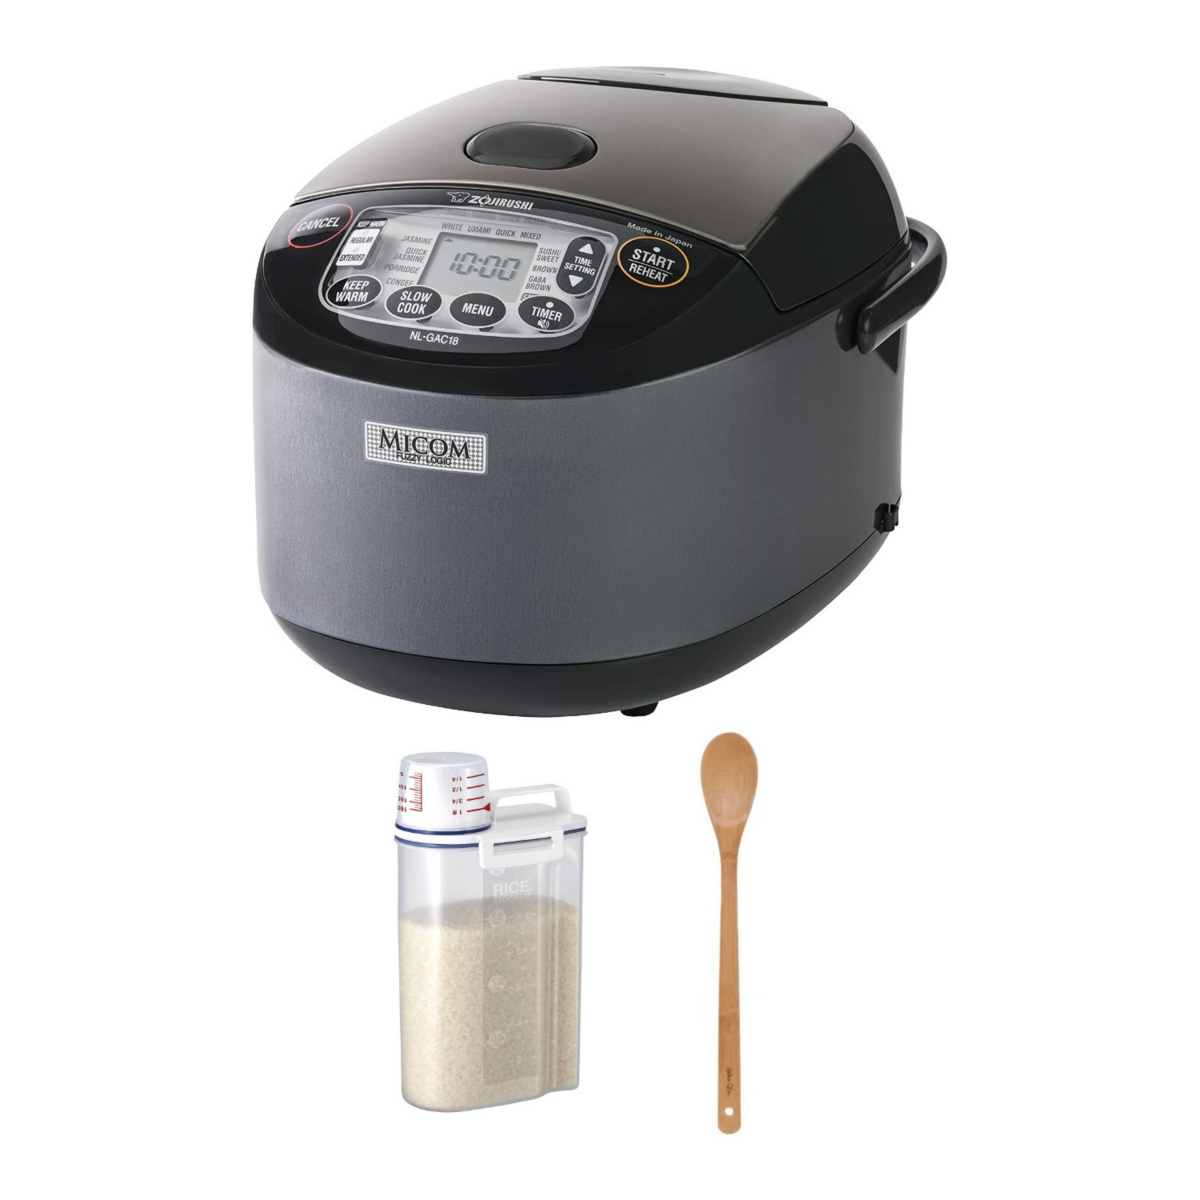 Umami Micom Rice Cooker With Rice Cooker Recipe Book And Bamboo Spoon - Black